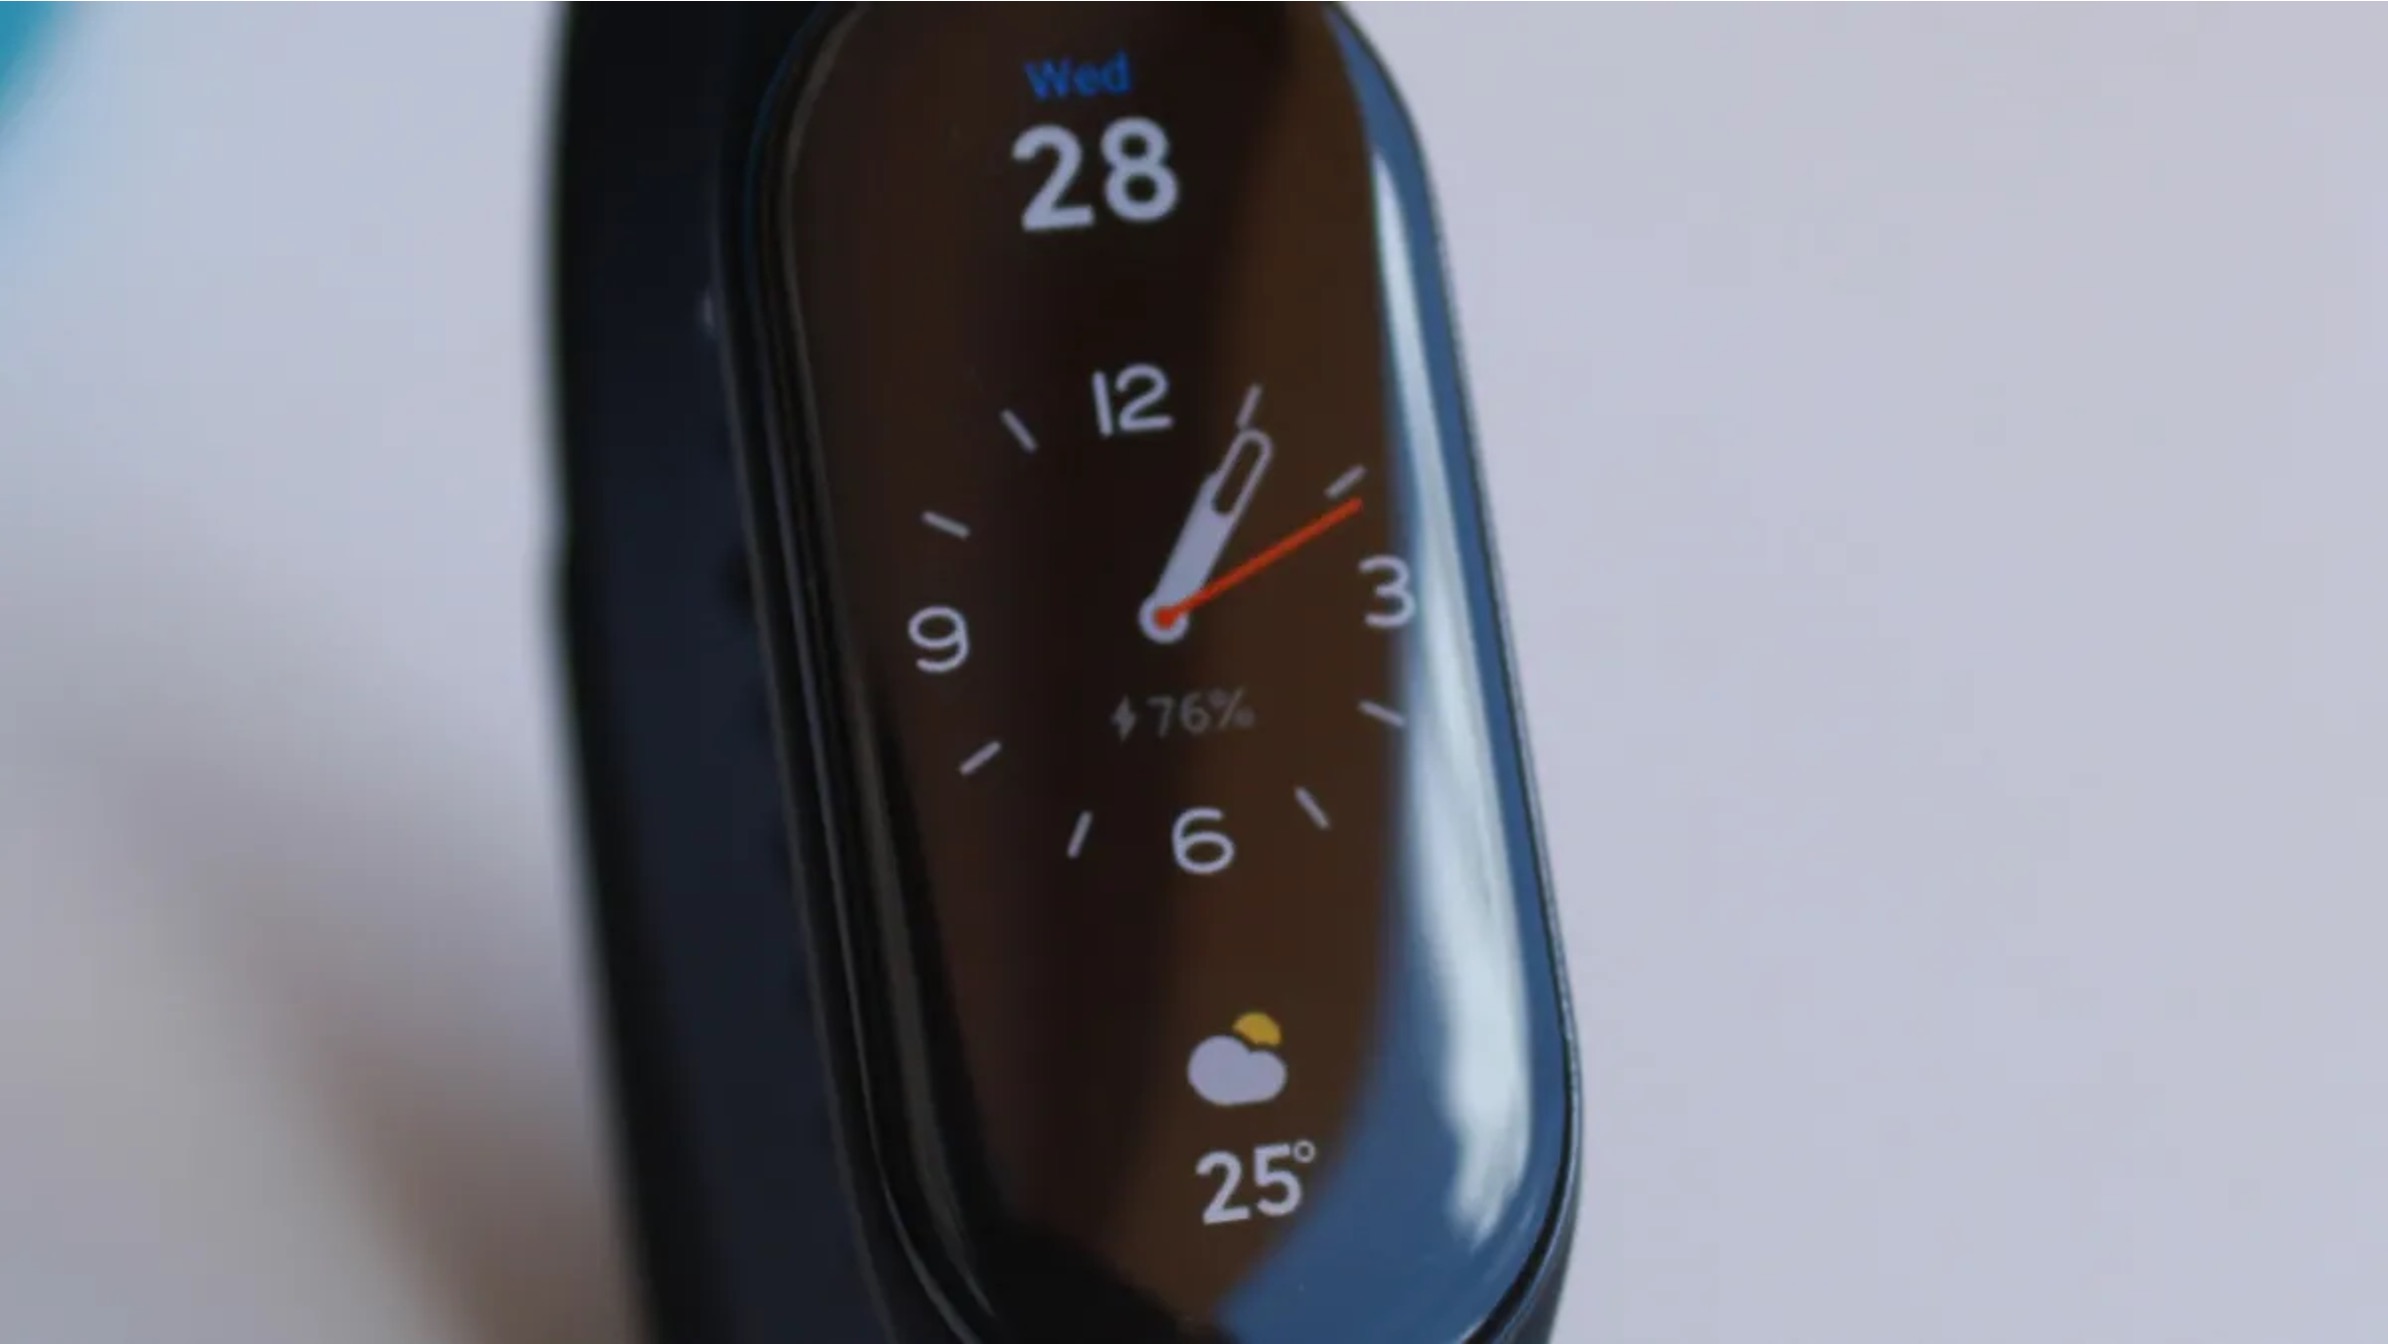 Xiaomi Mi Band Time Change: Step-by-Step Guide